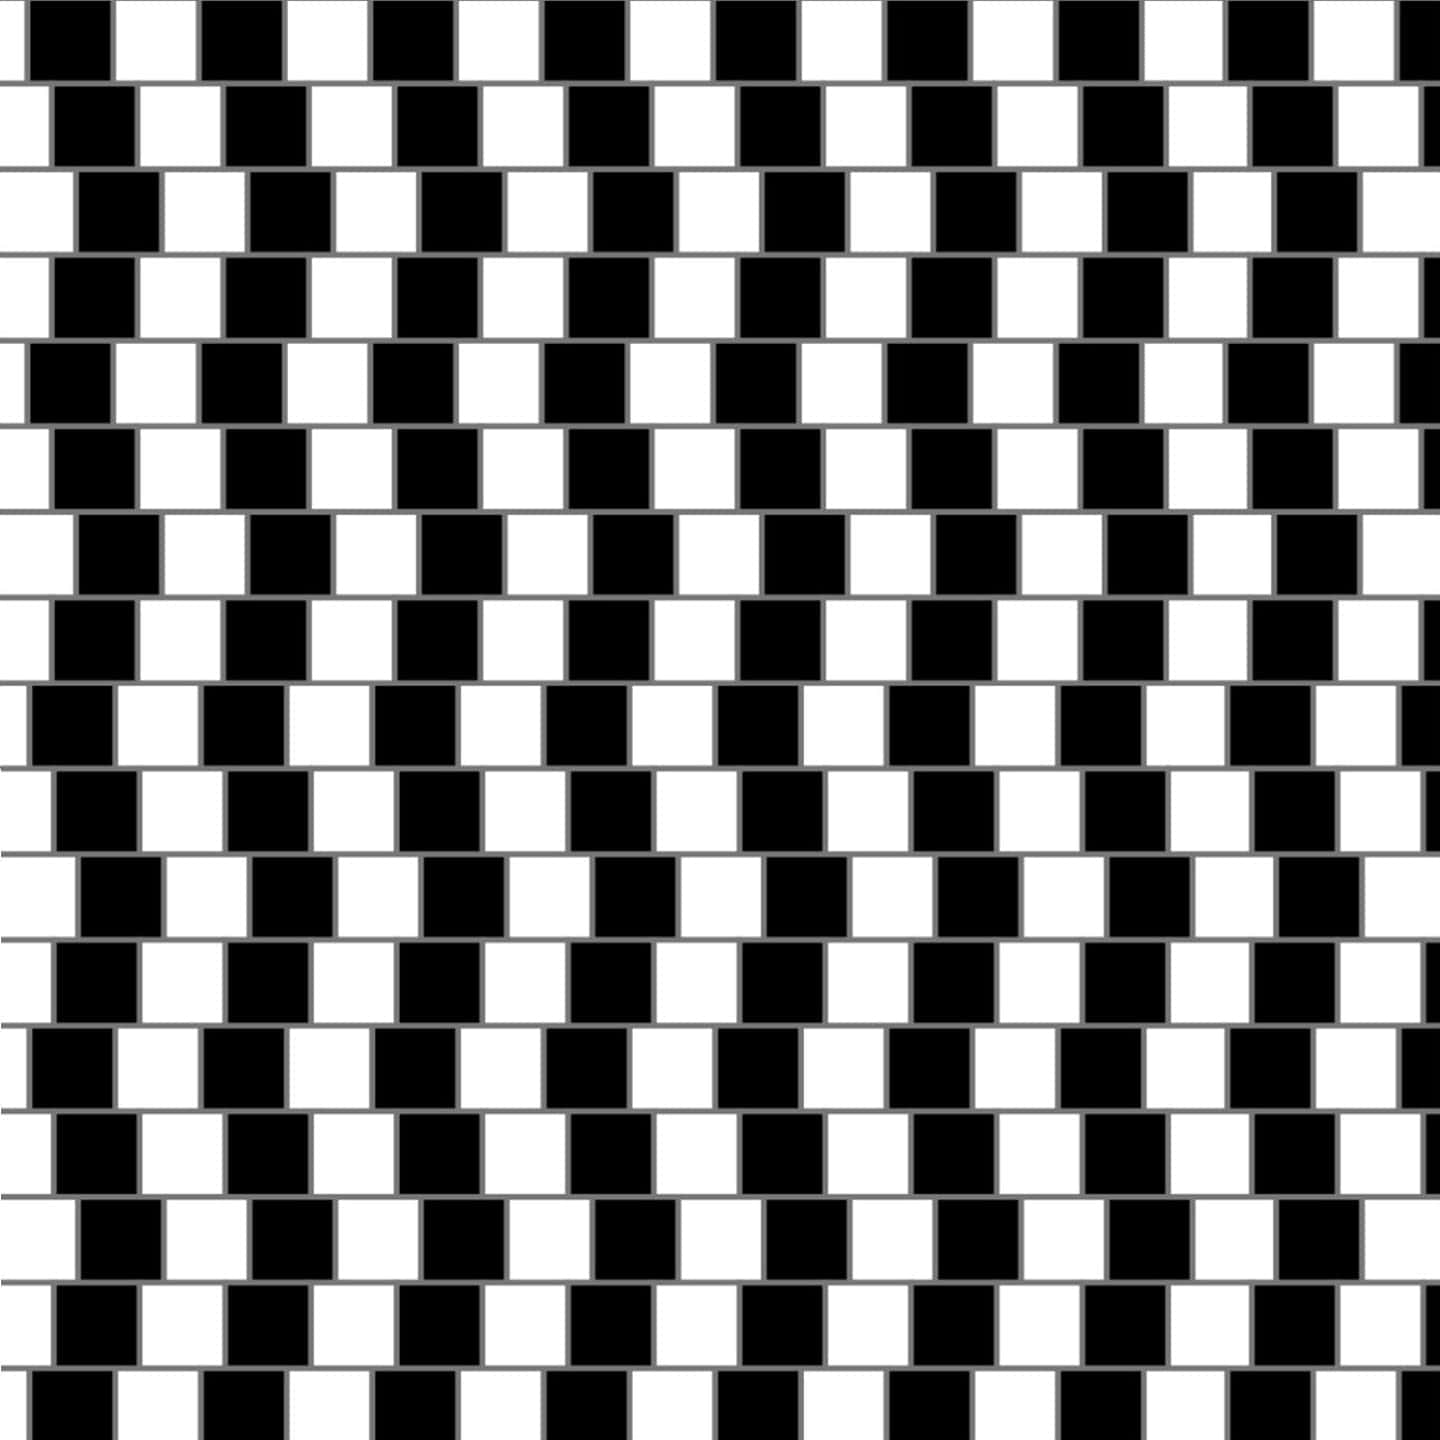 A Black And White Illusion With A Square Pattern